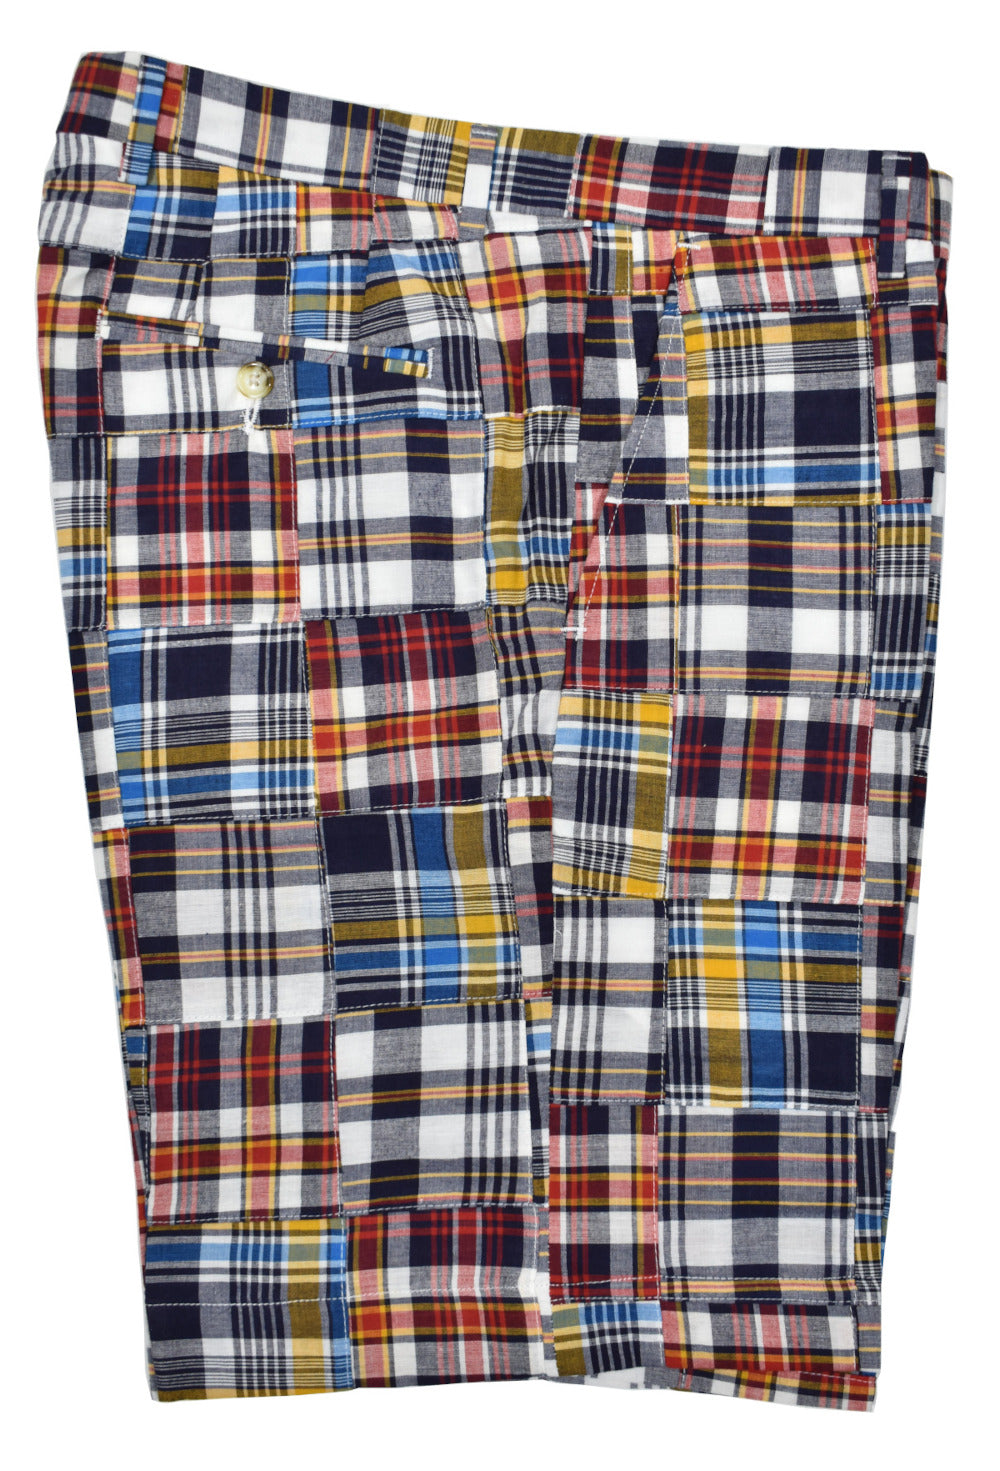 Dress up your Spring/Summer look with a traditional madras patterned short, sure to be a welcome change from your everyday solid shorts.  100% soft combed cotton for comfort and breathability. Cool patchwork style adds an array of color perfect to pair with many color tees.  Just above the knees length, classic pockets and classic fit.  Colors: Black, Red